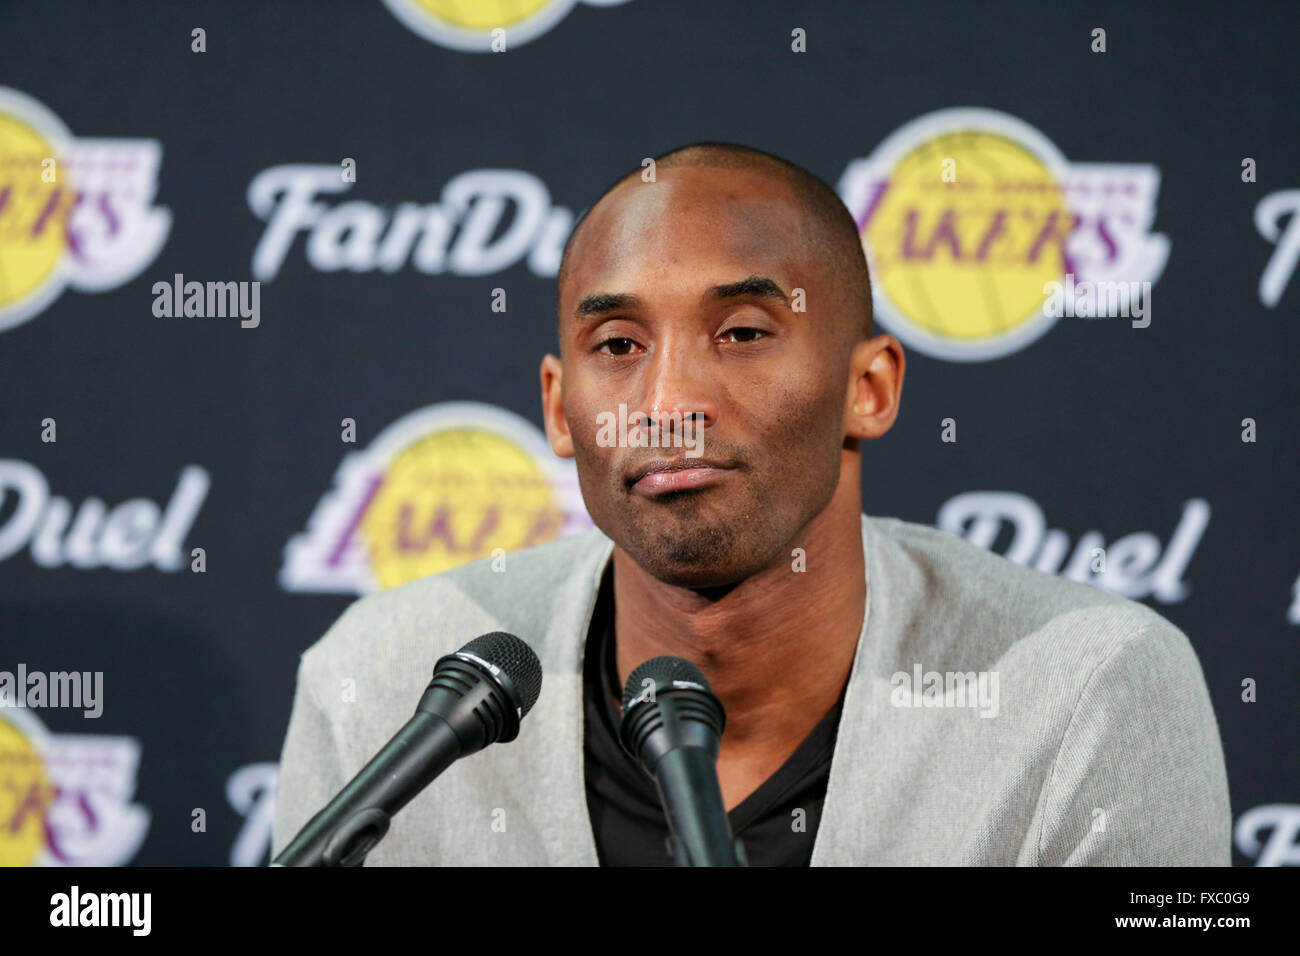 New Orleans, LA, USA. 08th Apr, 2016. Los Angeles Lakers forward Kobe Bryant (24)giving a press conference after an NBA basketball game between the Los Angeles Lakers and the New Orleans Pelicans at the Smoothie King Center in New Orleans, LA. Stephen Lew/CSM/Alamy Live News Stock Photo